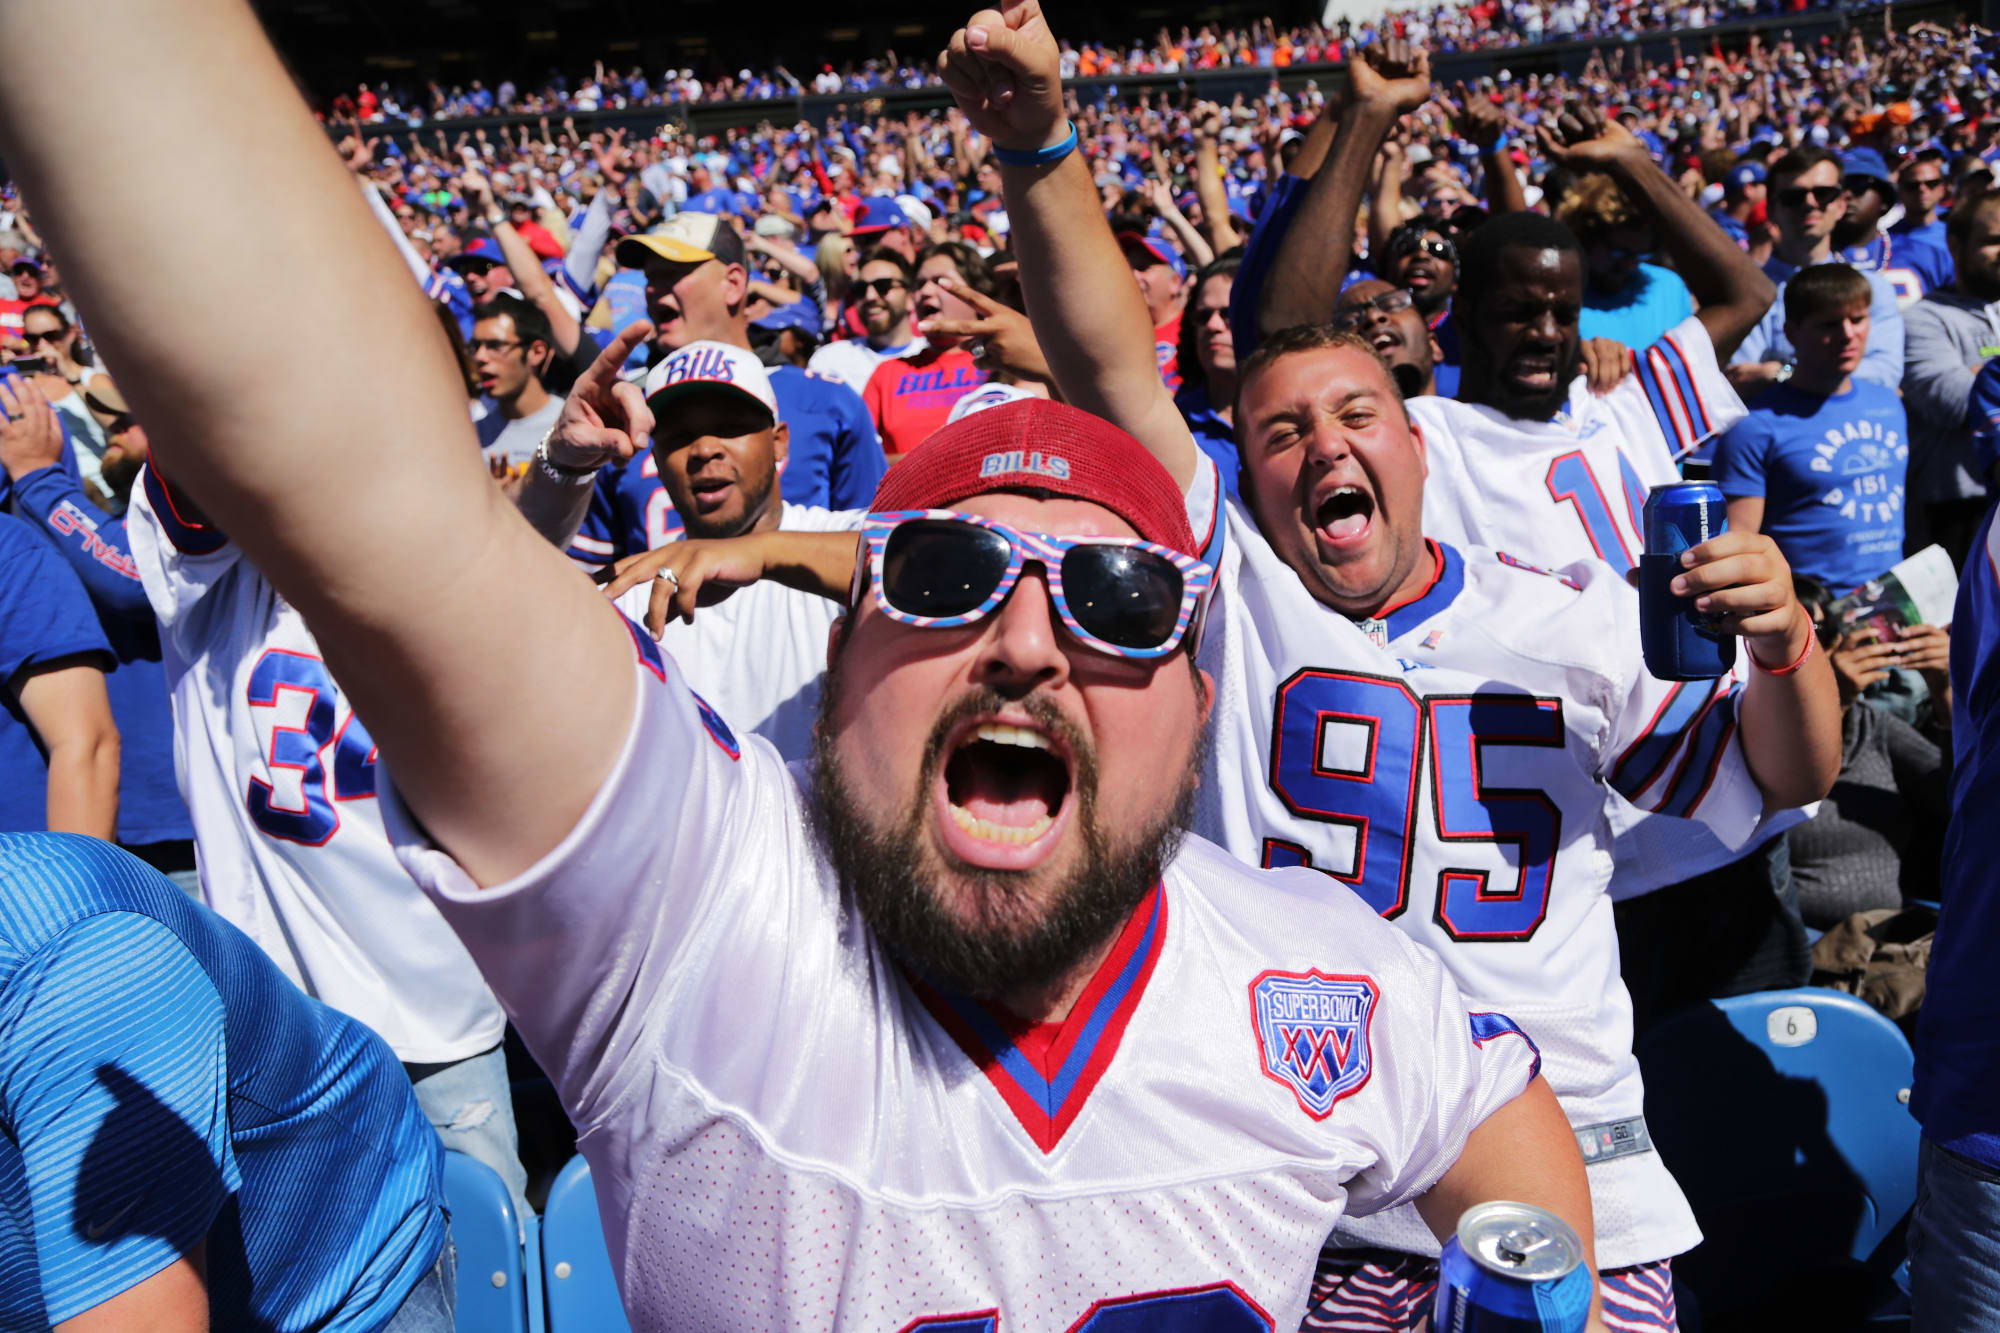 Opening Sunday, Bills fans will be united behind their team